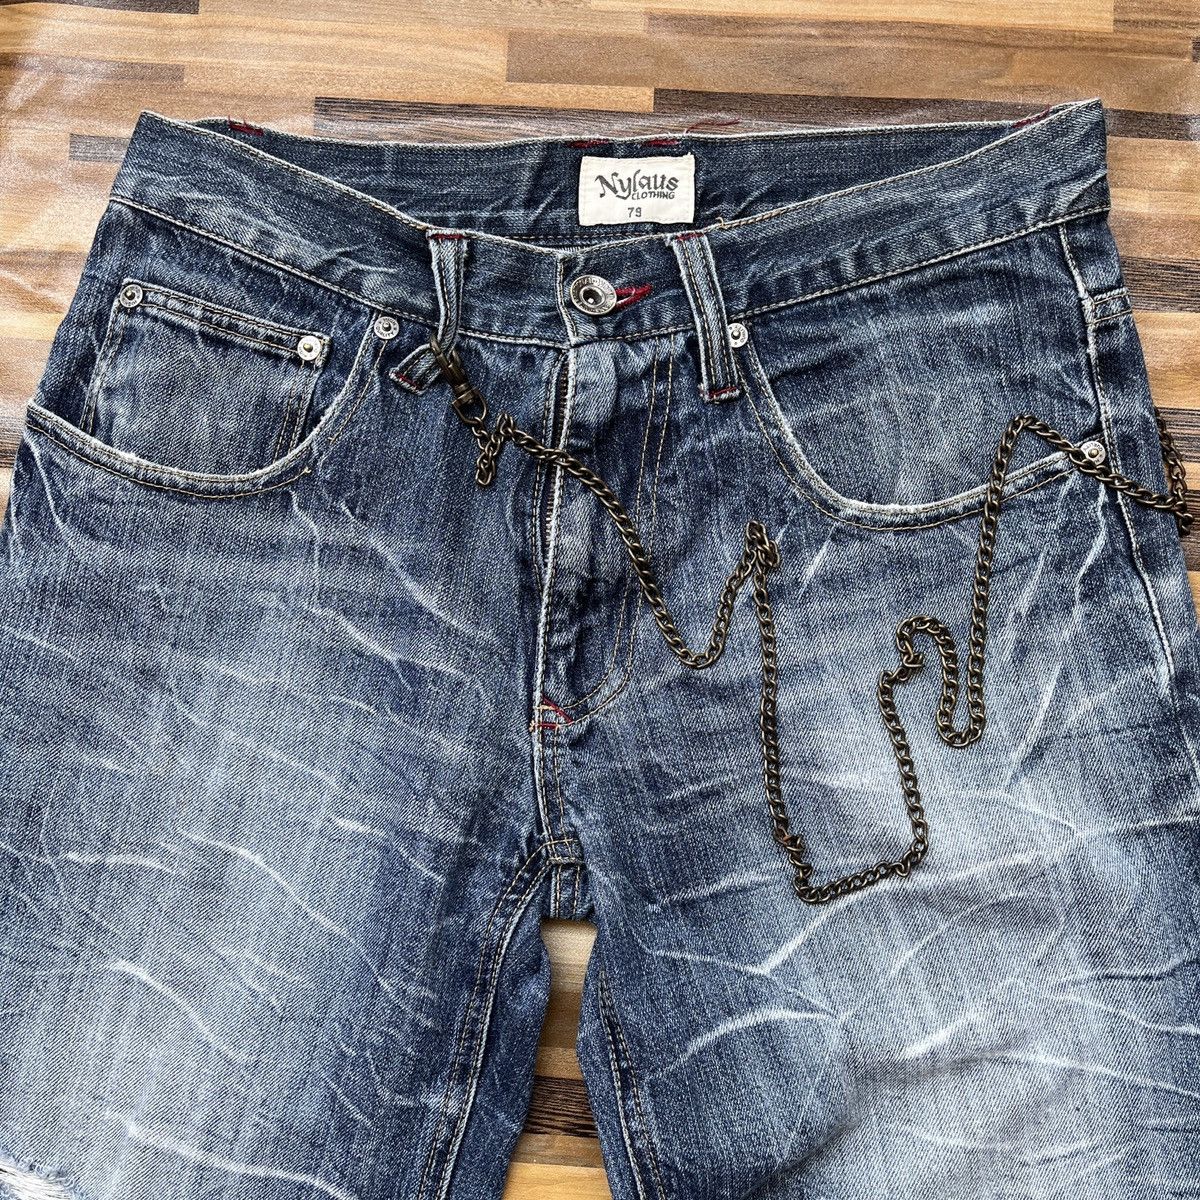 Japanese Brand - Nylaus Clothing Hysteric Style Denim Jeans Seditionaries - 7